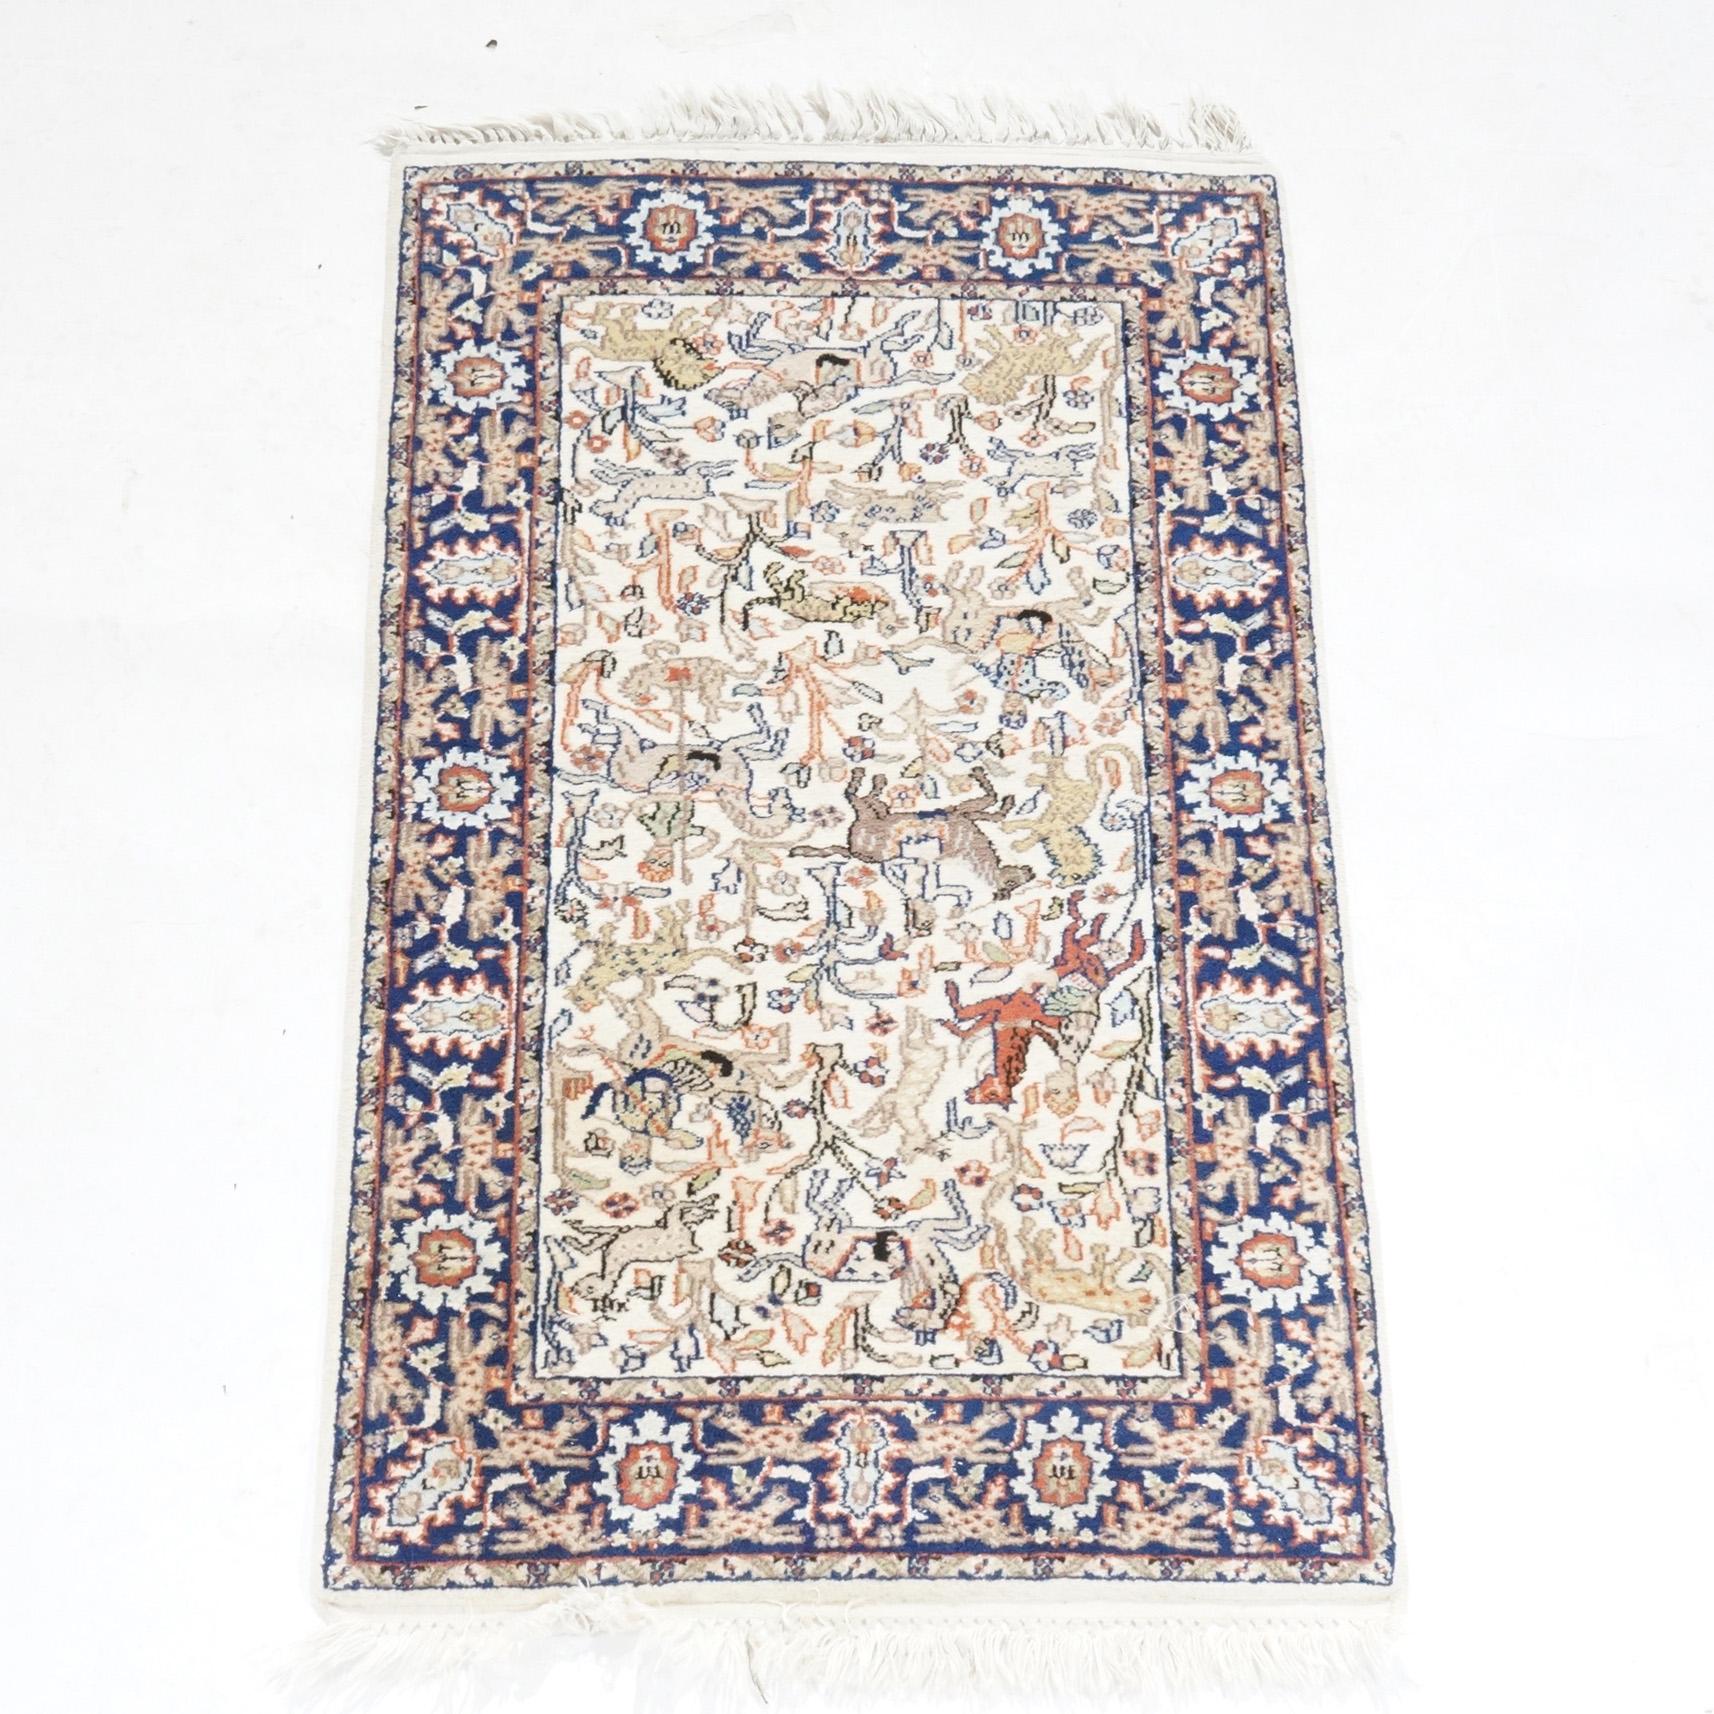 A Tabriz Oriental Wool Hunt Rug with Figures & Animals, 20th century.

Measures - 54